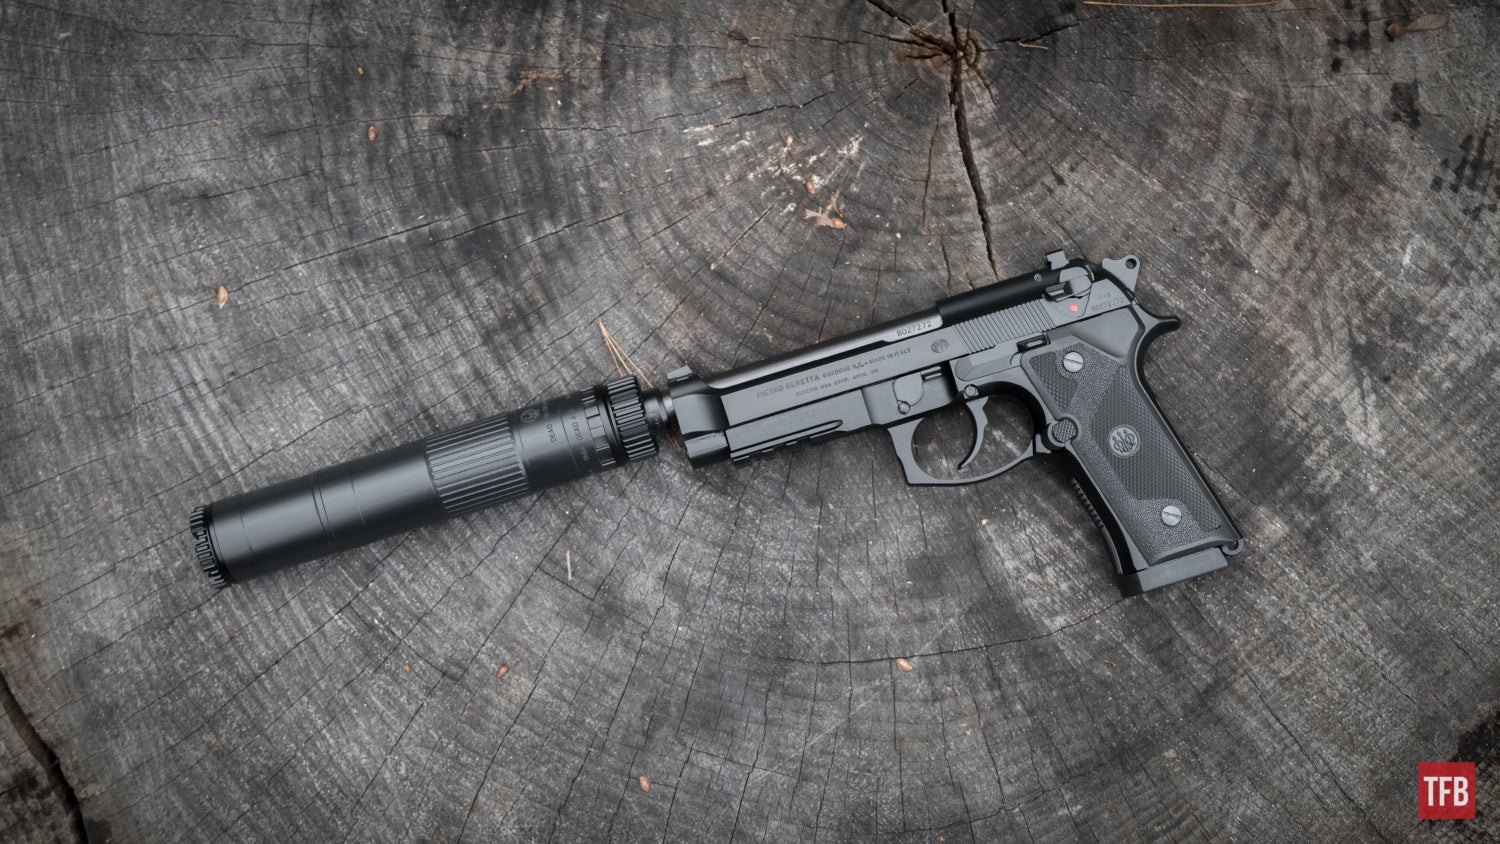 SILENCER SATURDAY 300: Introducing the Dead Air Mohave 9